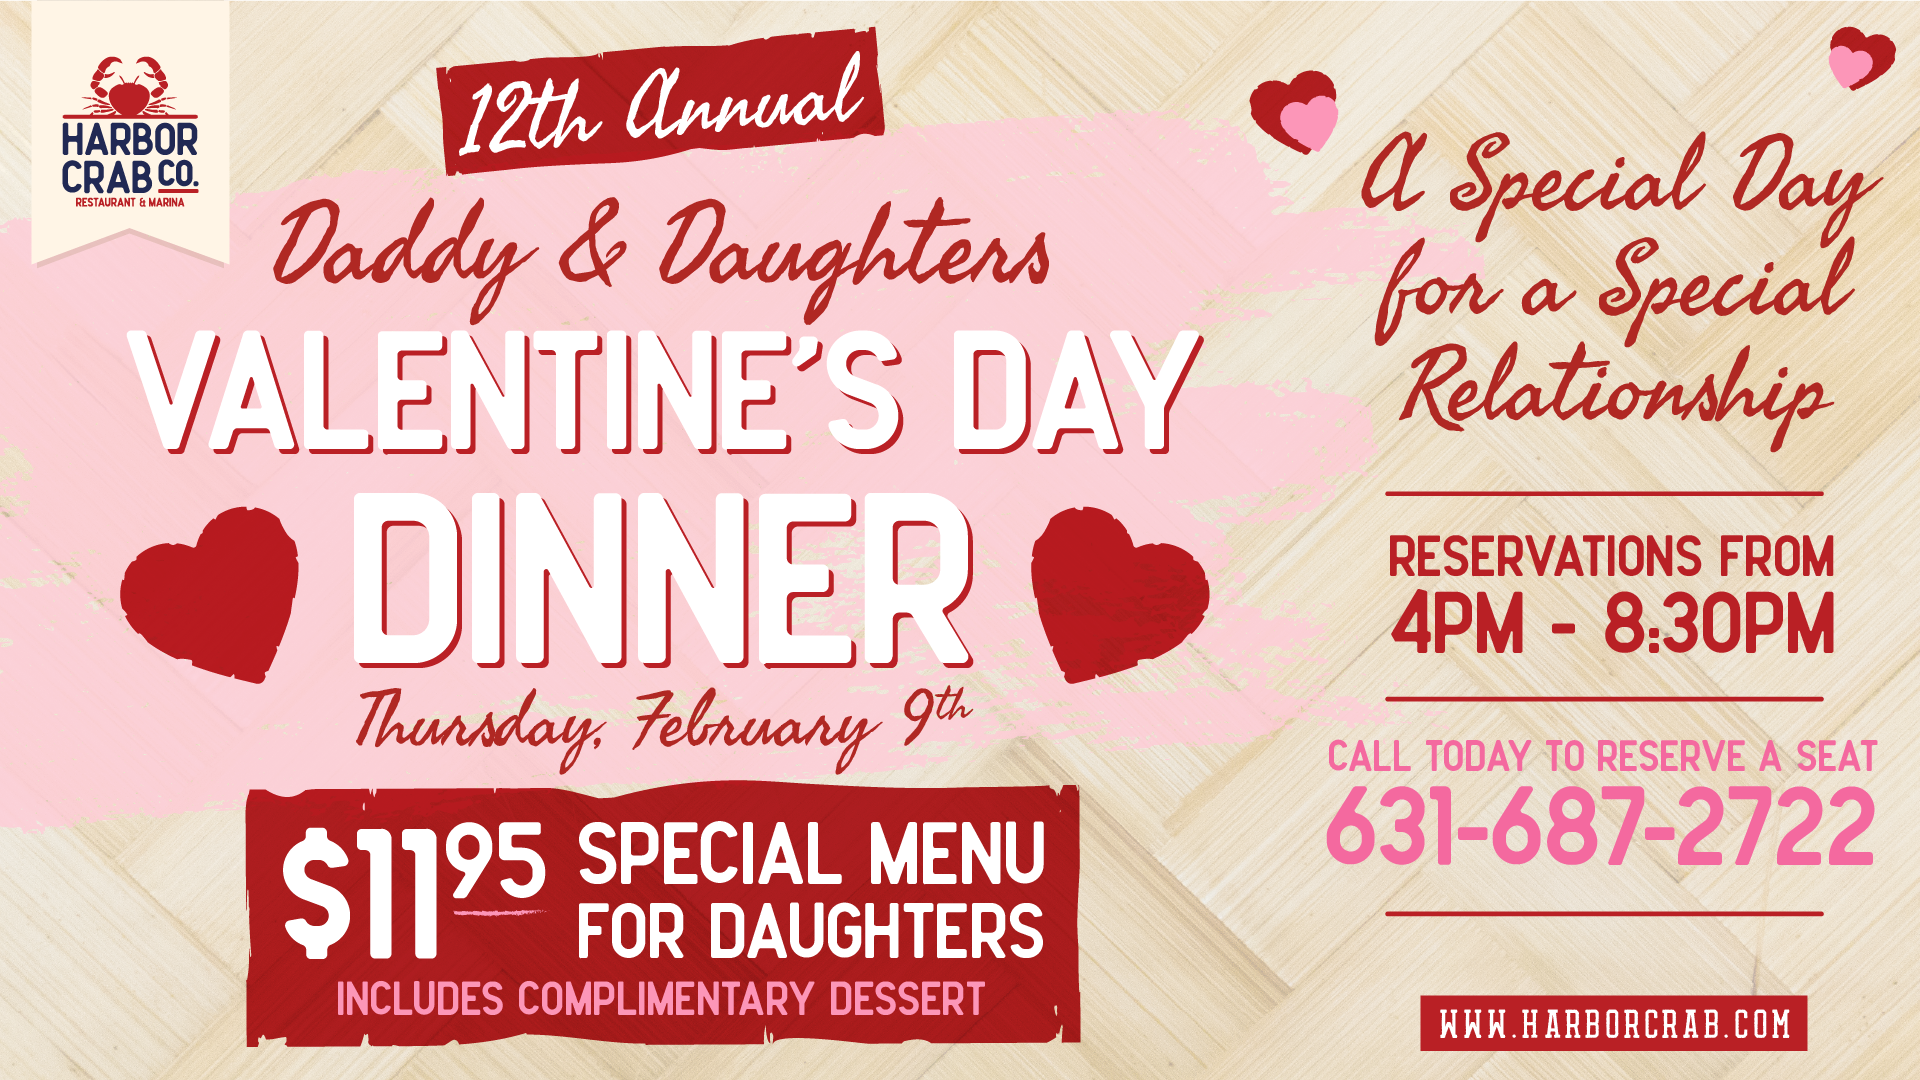 12th Annual Daddy & Daughter's Valentine's Day Dinner at Harbor Crab on Thursday, February 9th